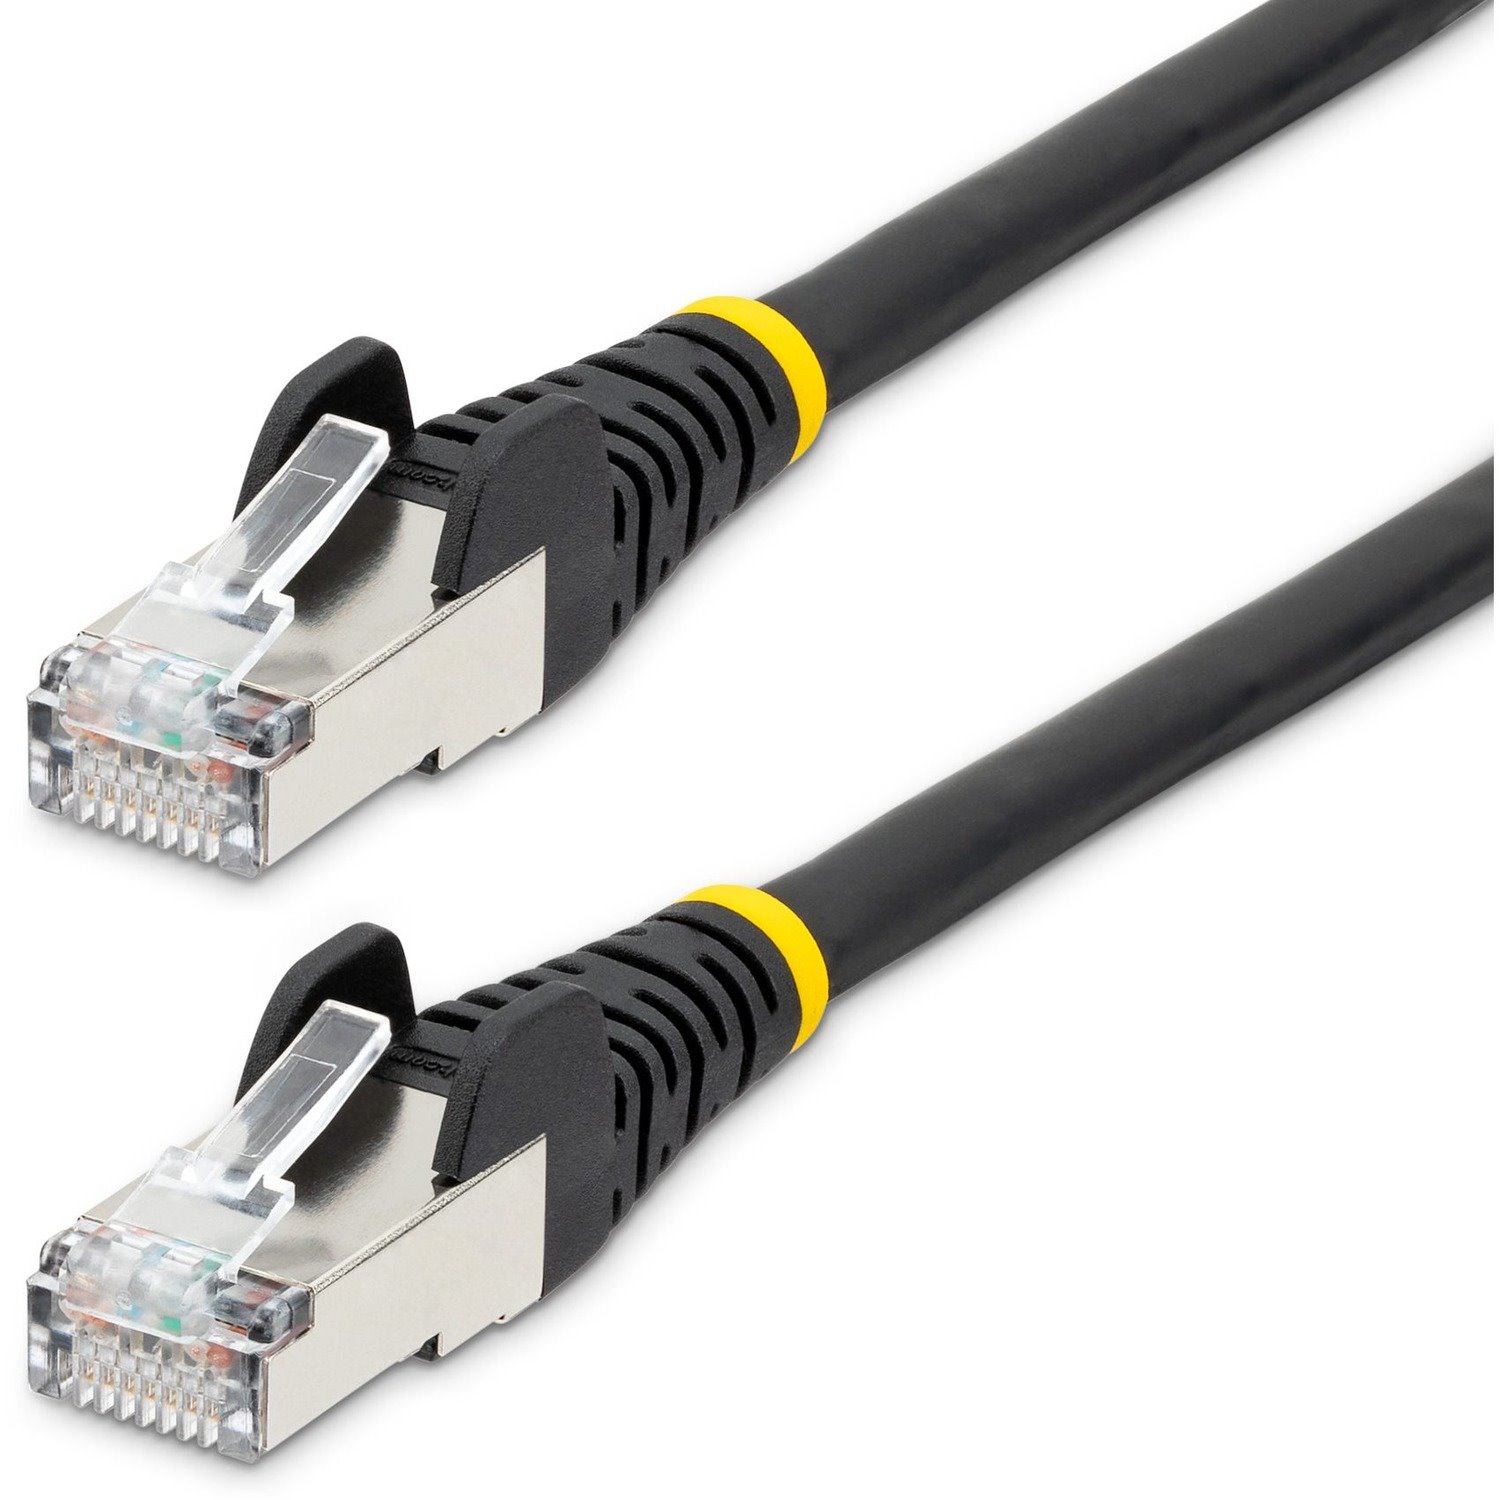 StarTech.com 10 m Category 6a Network Cable for Network Device - 1 Pack